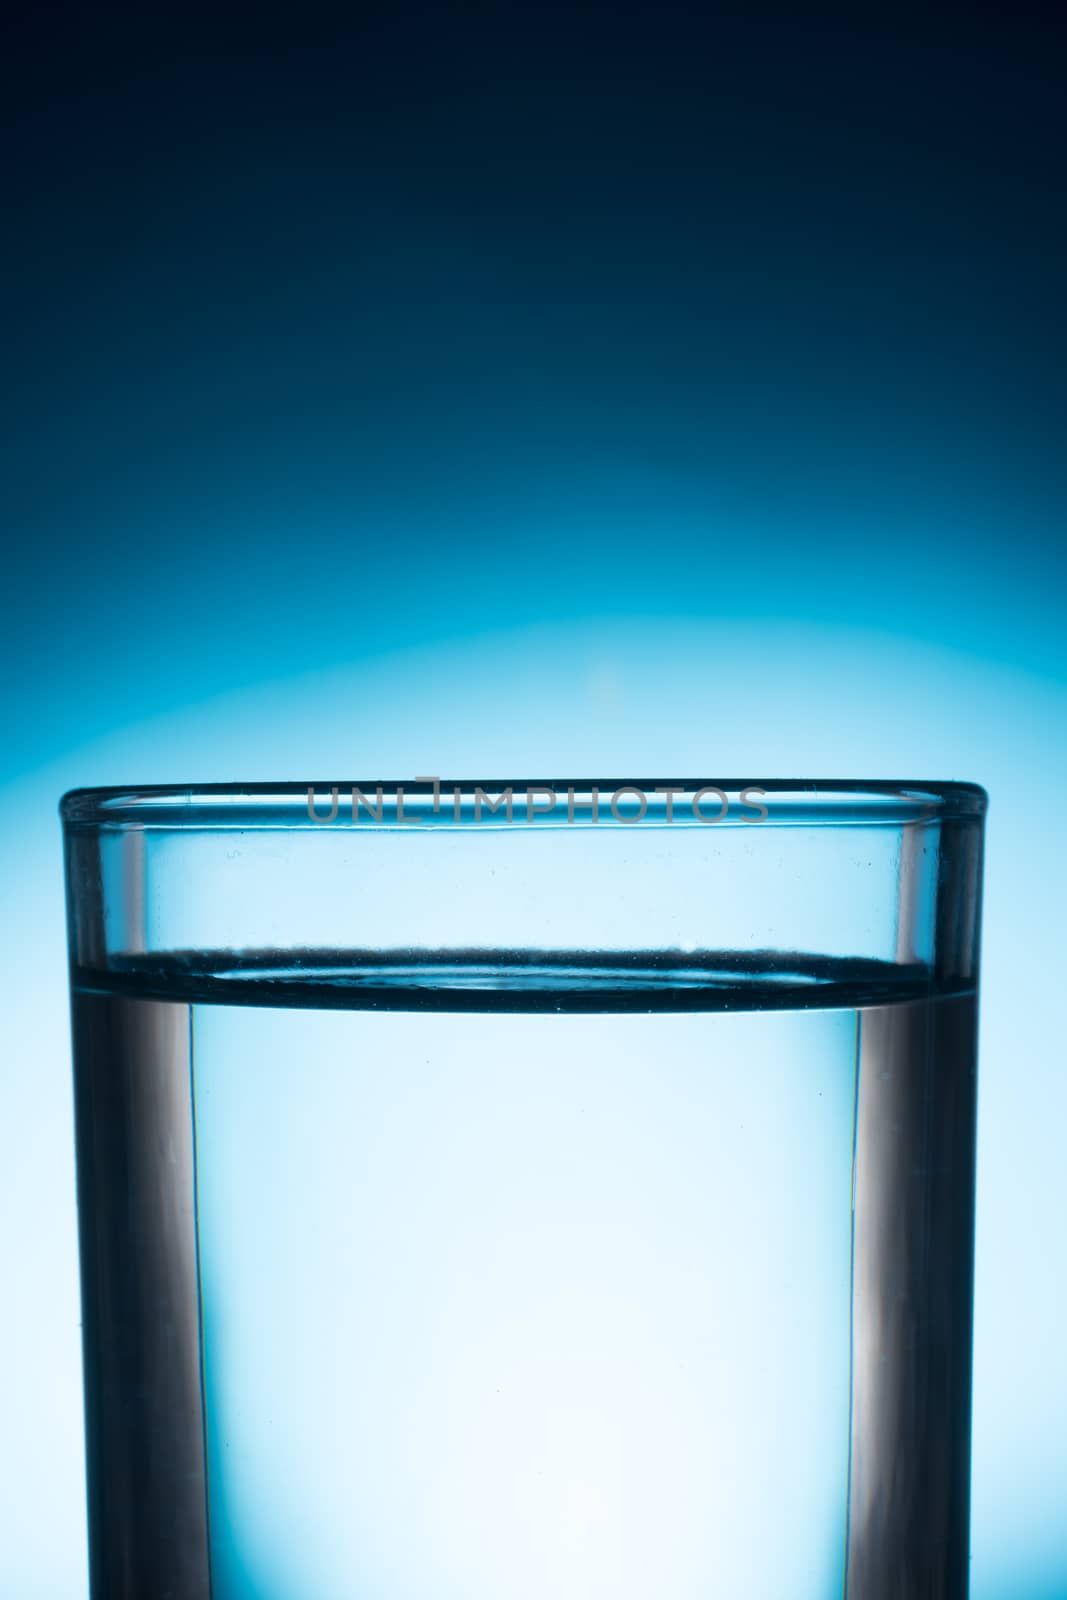 A glass of water on blue background. by ronnarong